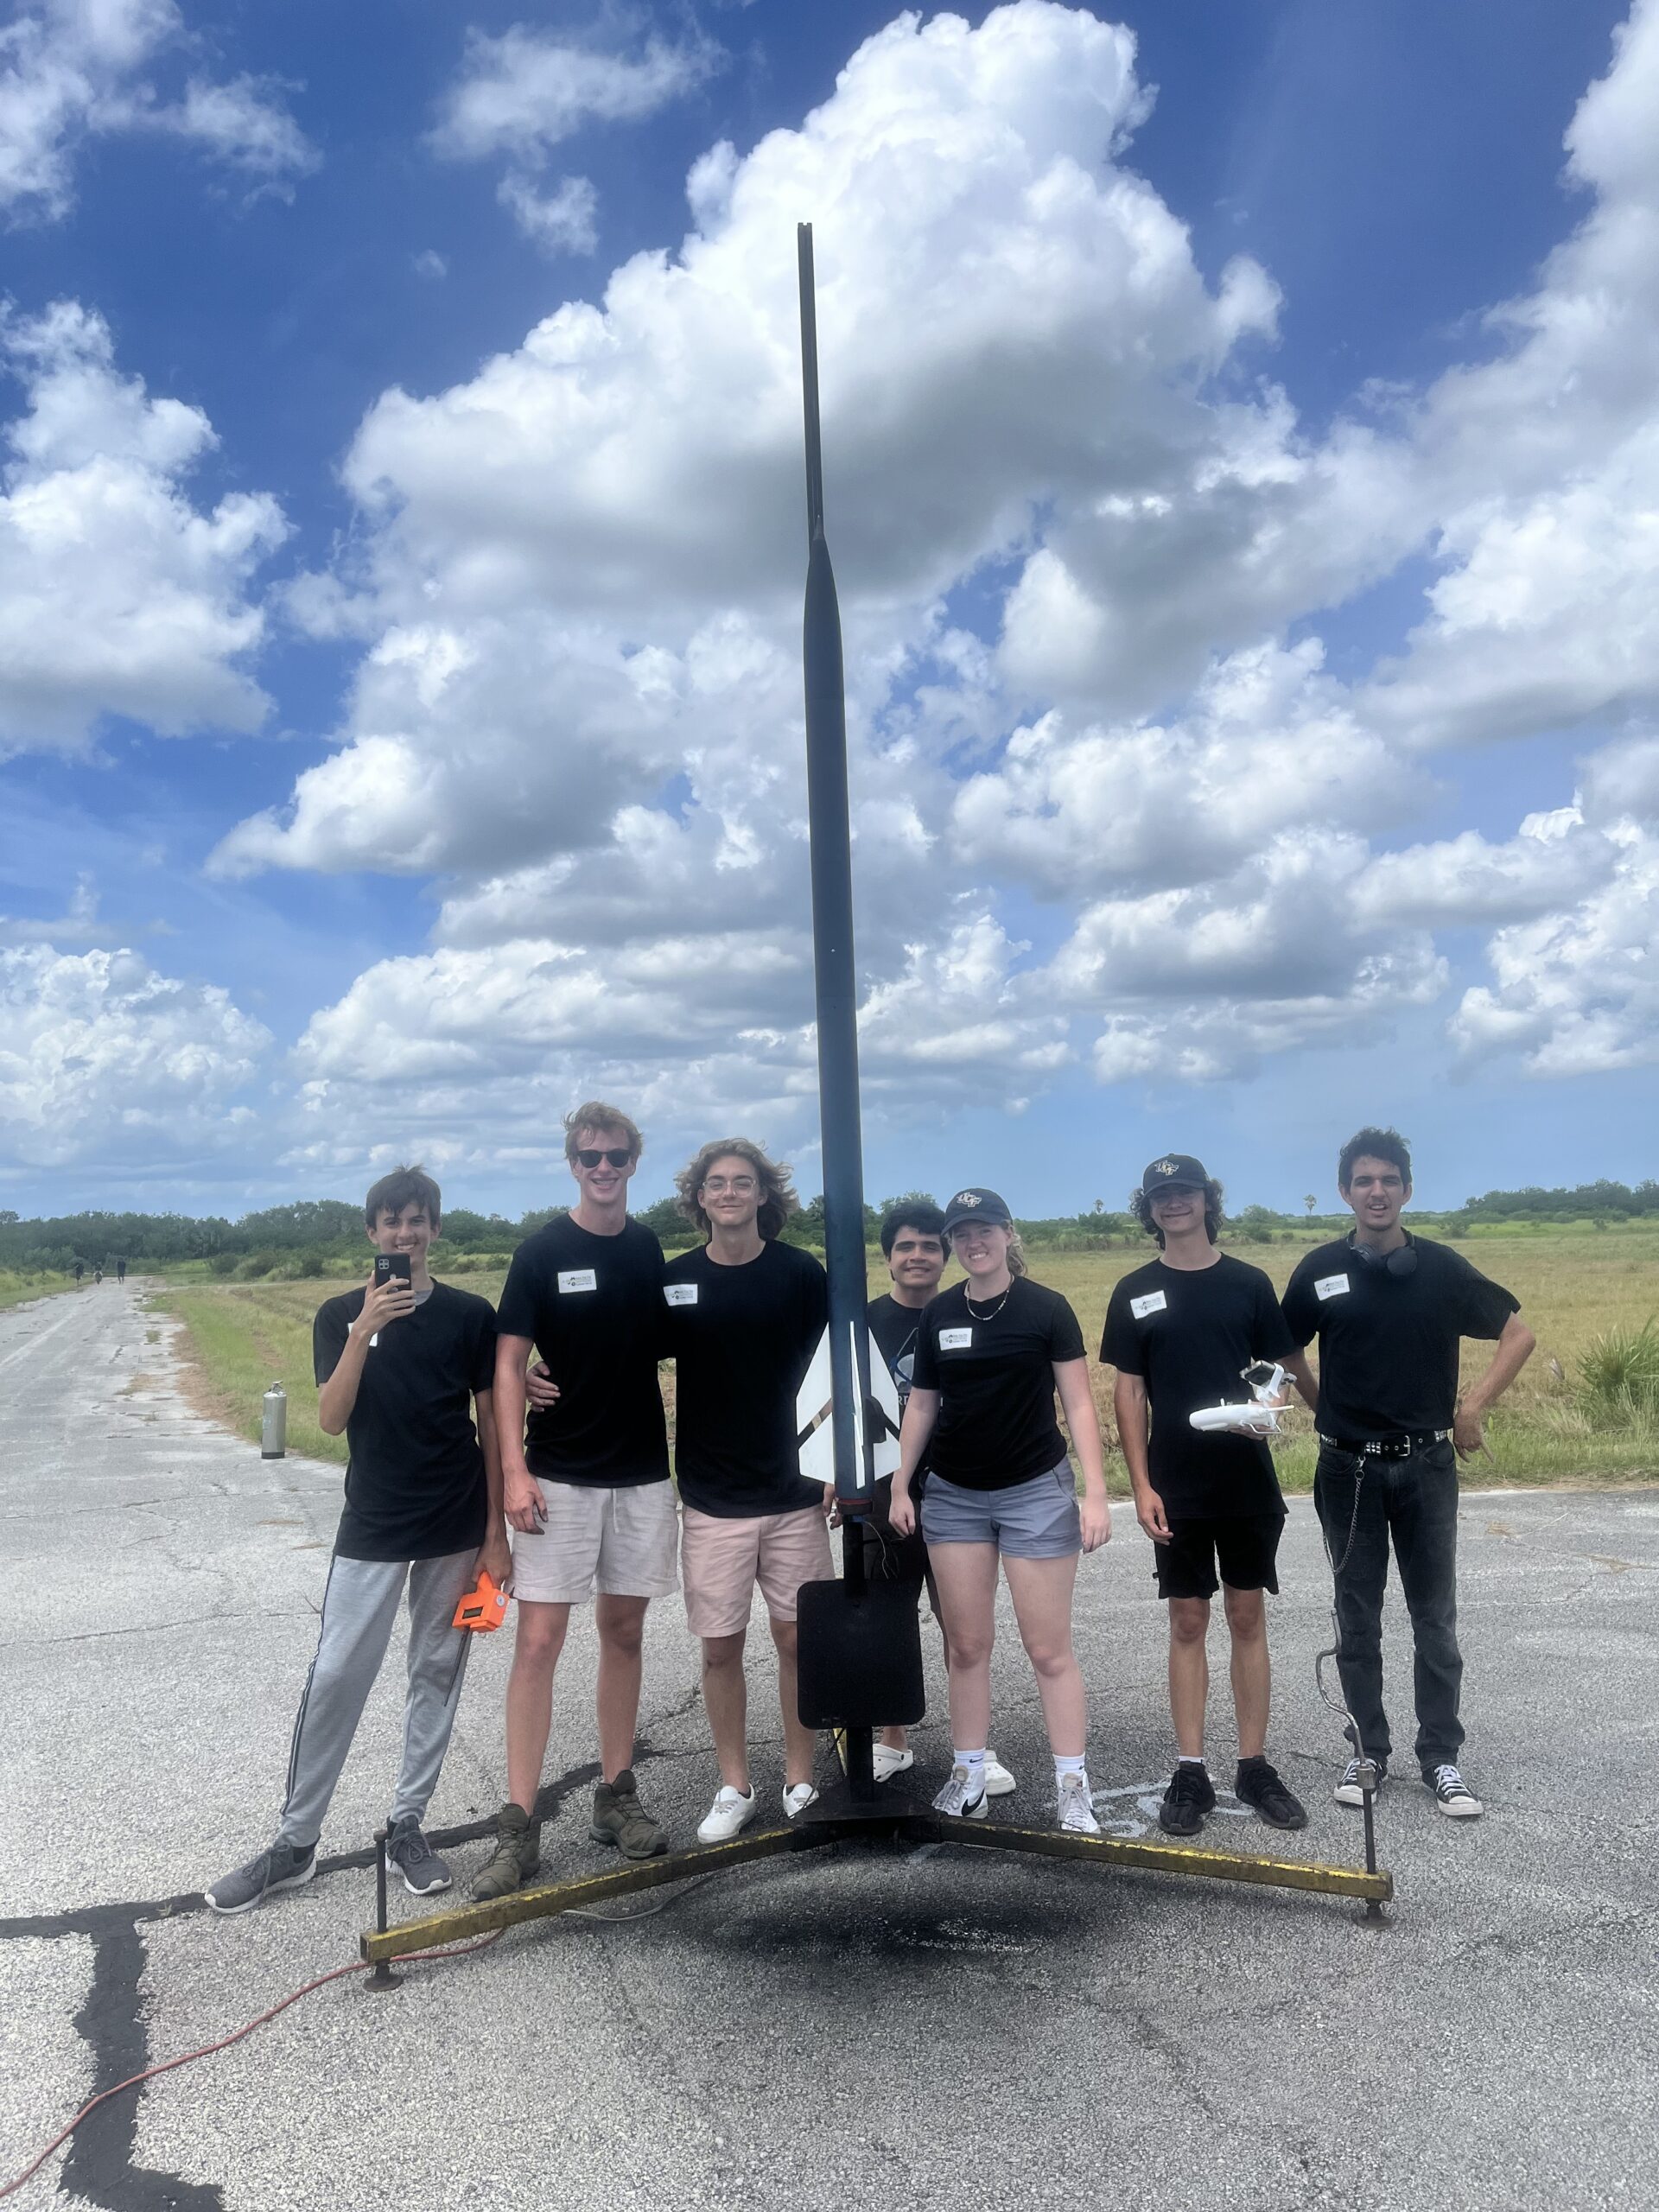 Team True Fire Rocketry Club poses with rocket before launch